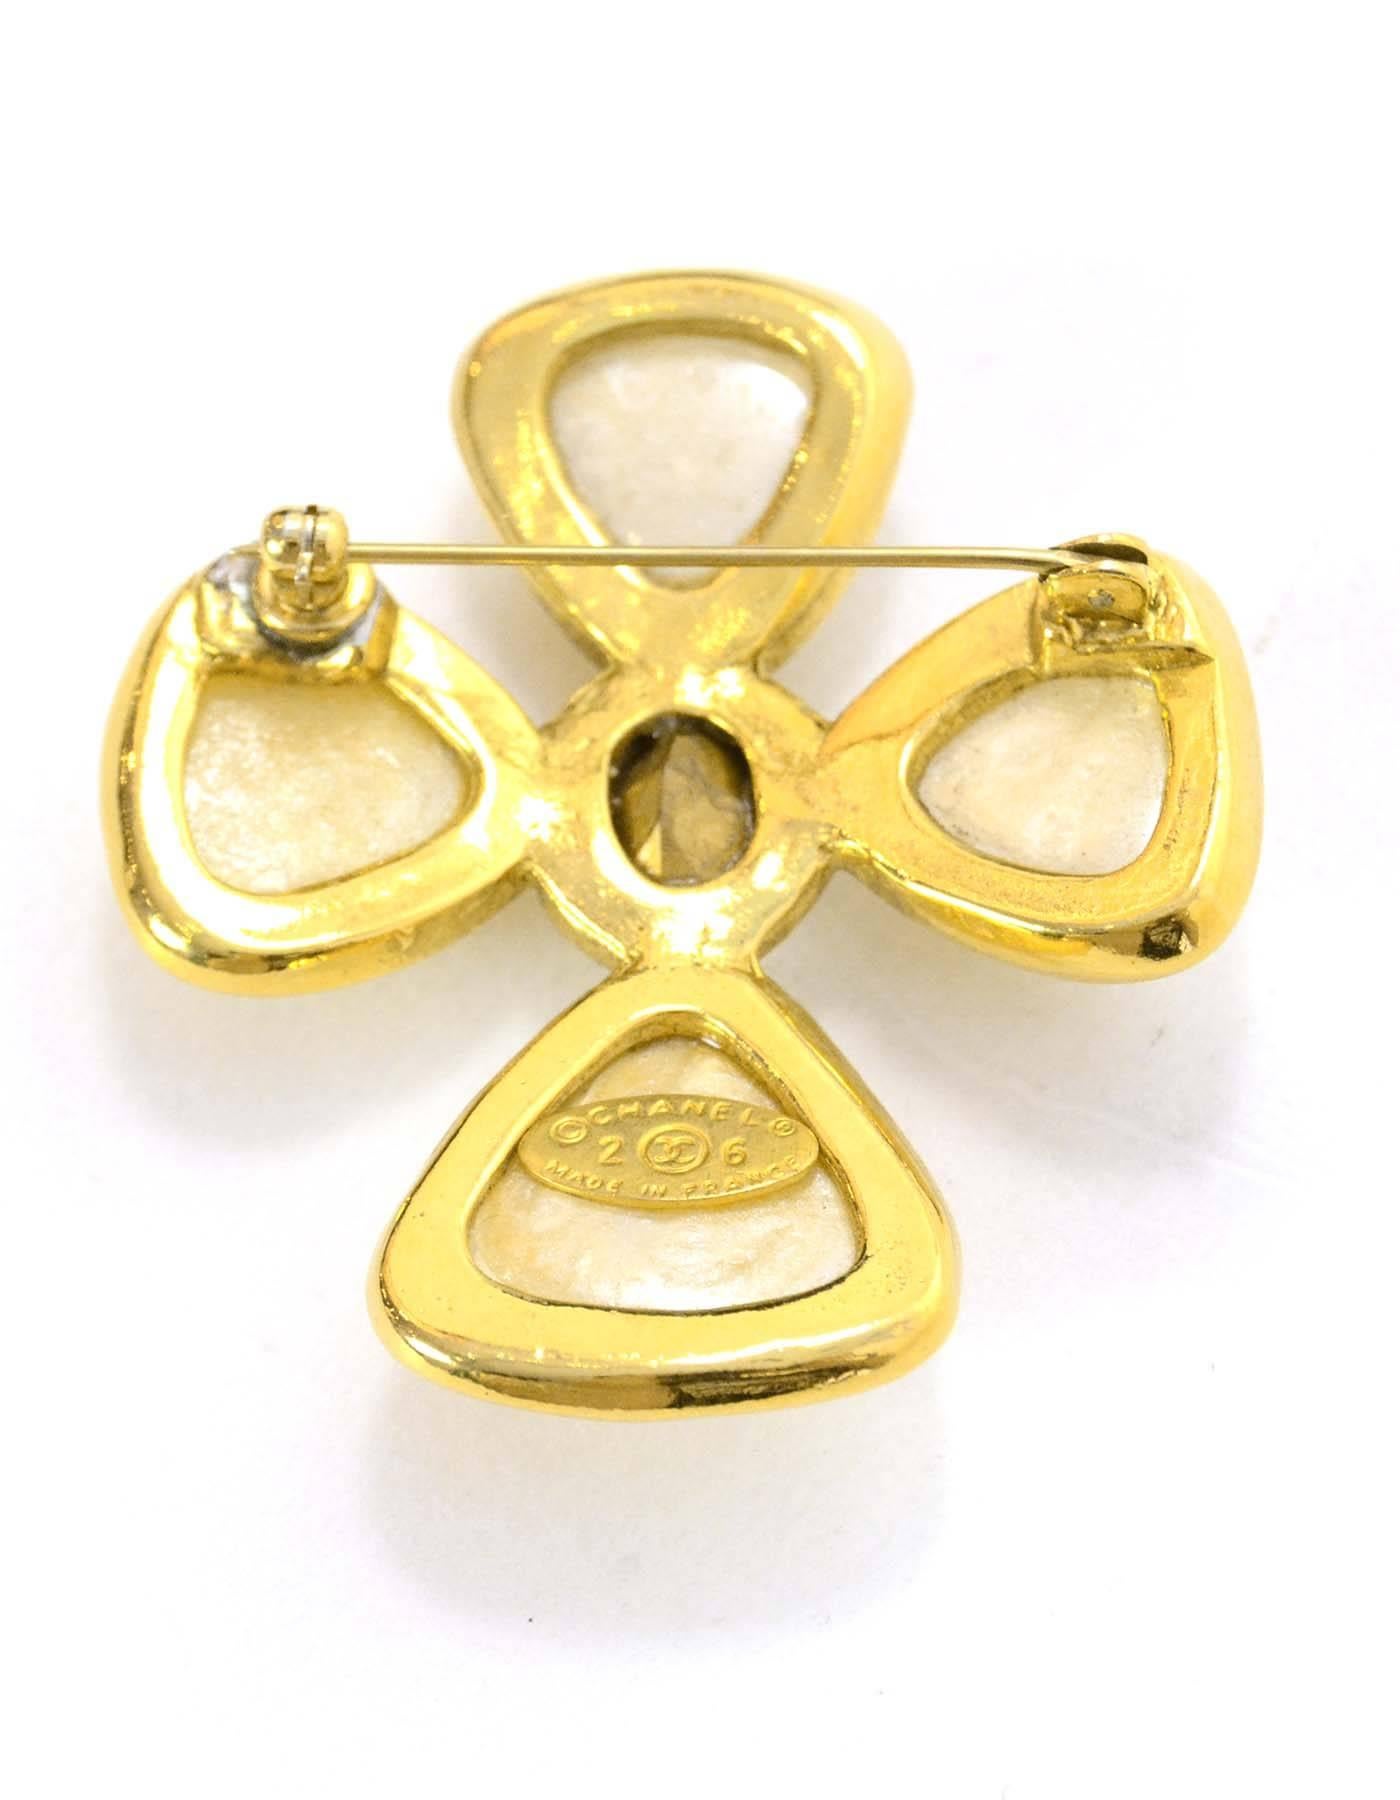 Chanel Pearl & Crystal Cross Brooch

Made In: France
Year of Production: 1987
Color: Ivory and goldtoone
Materials: Metal, faux pearl and crystal
Closure: Pin back closure
Stamp: 2 CC 6
Overall Condition: Very good vintage, pre-owned condition